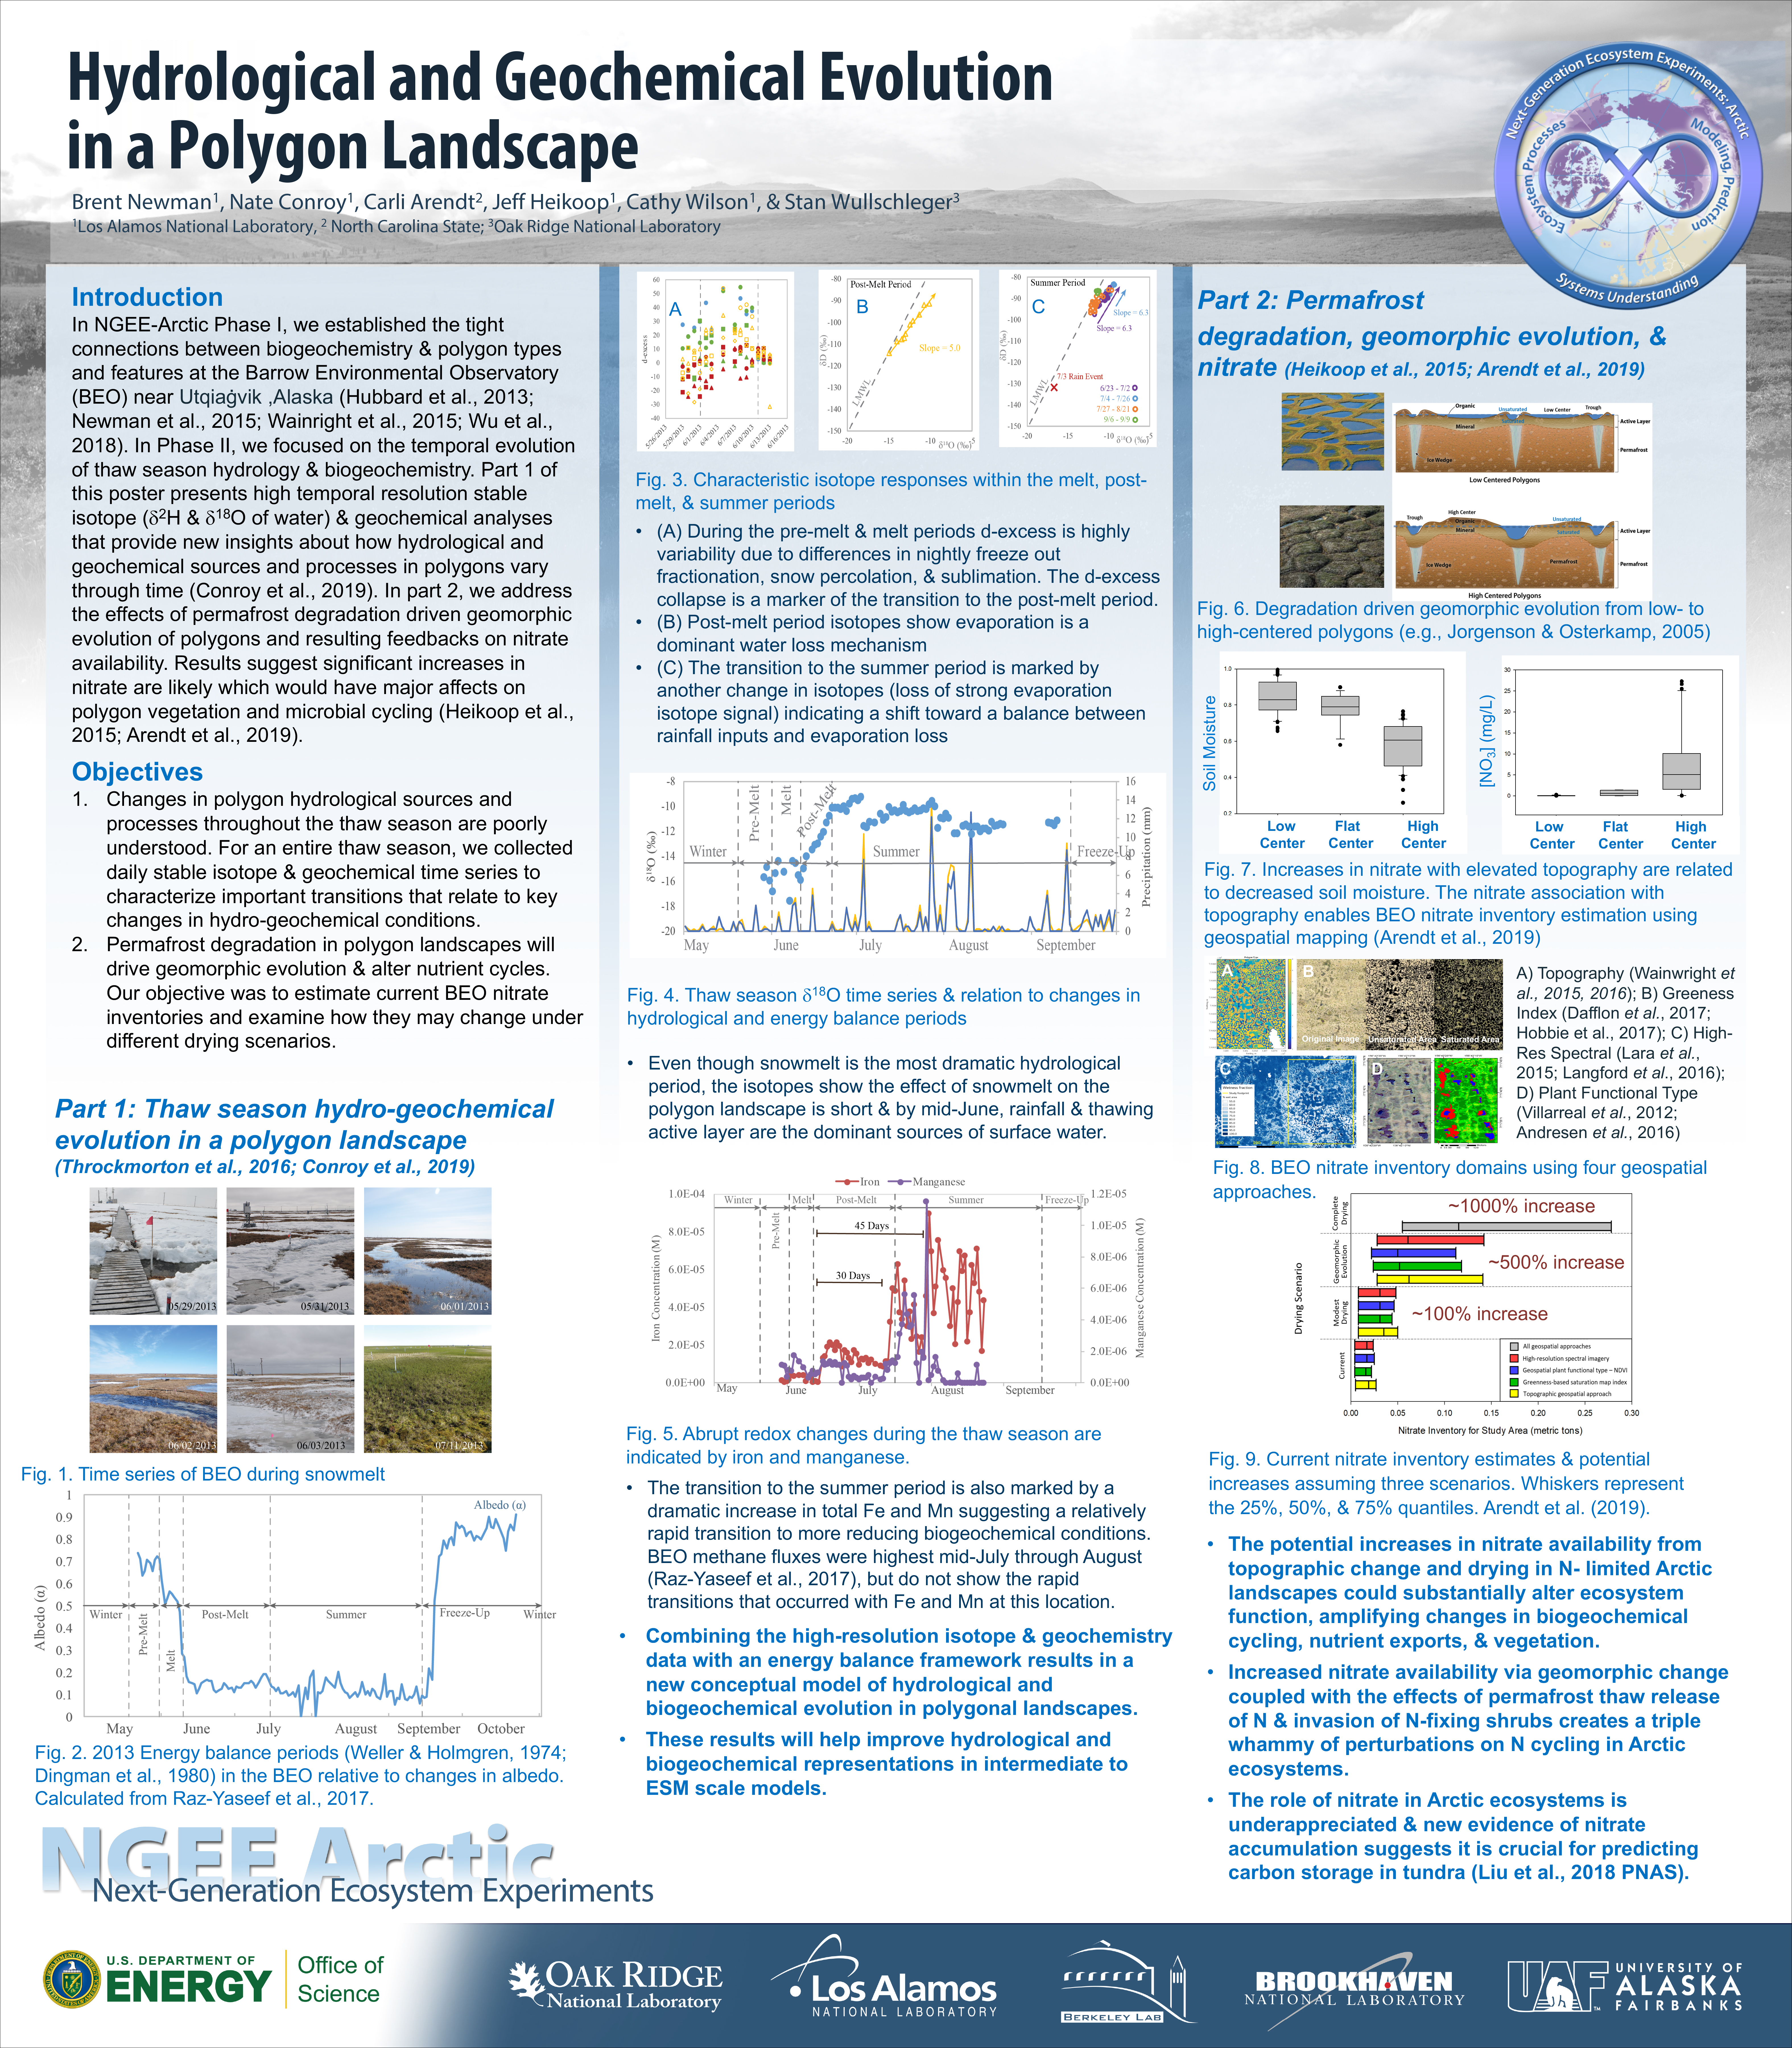 Hydrological and Geochemical Evolution in a Polygon Landscape poster